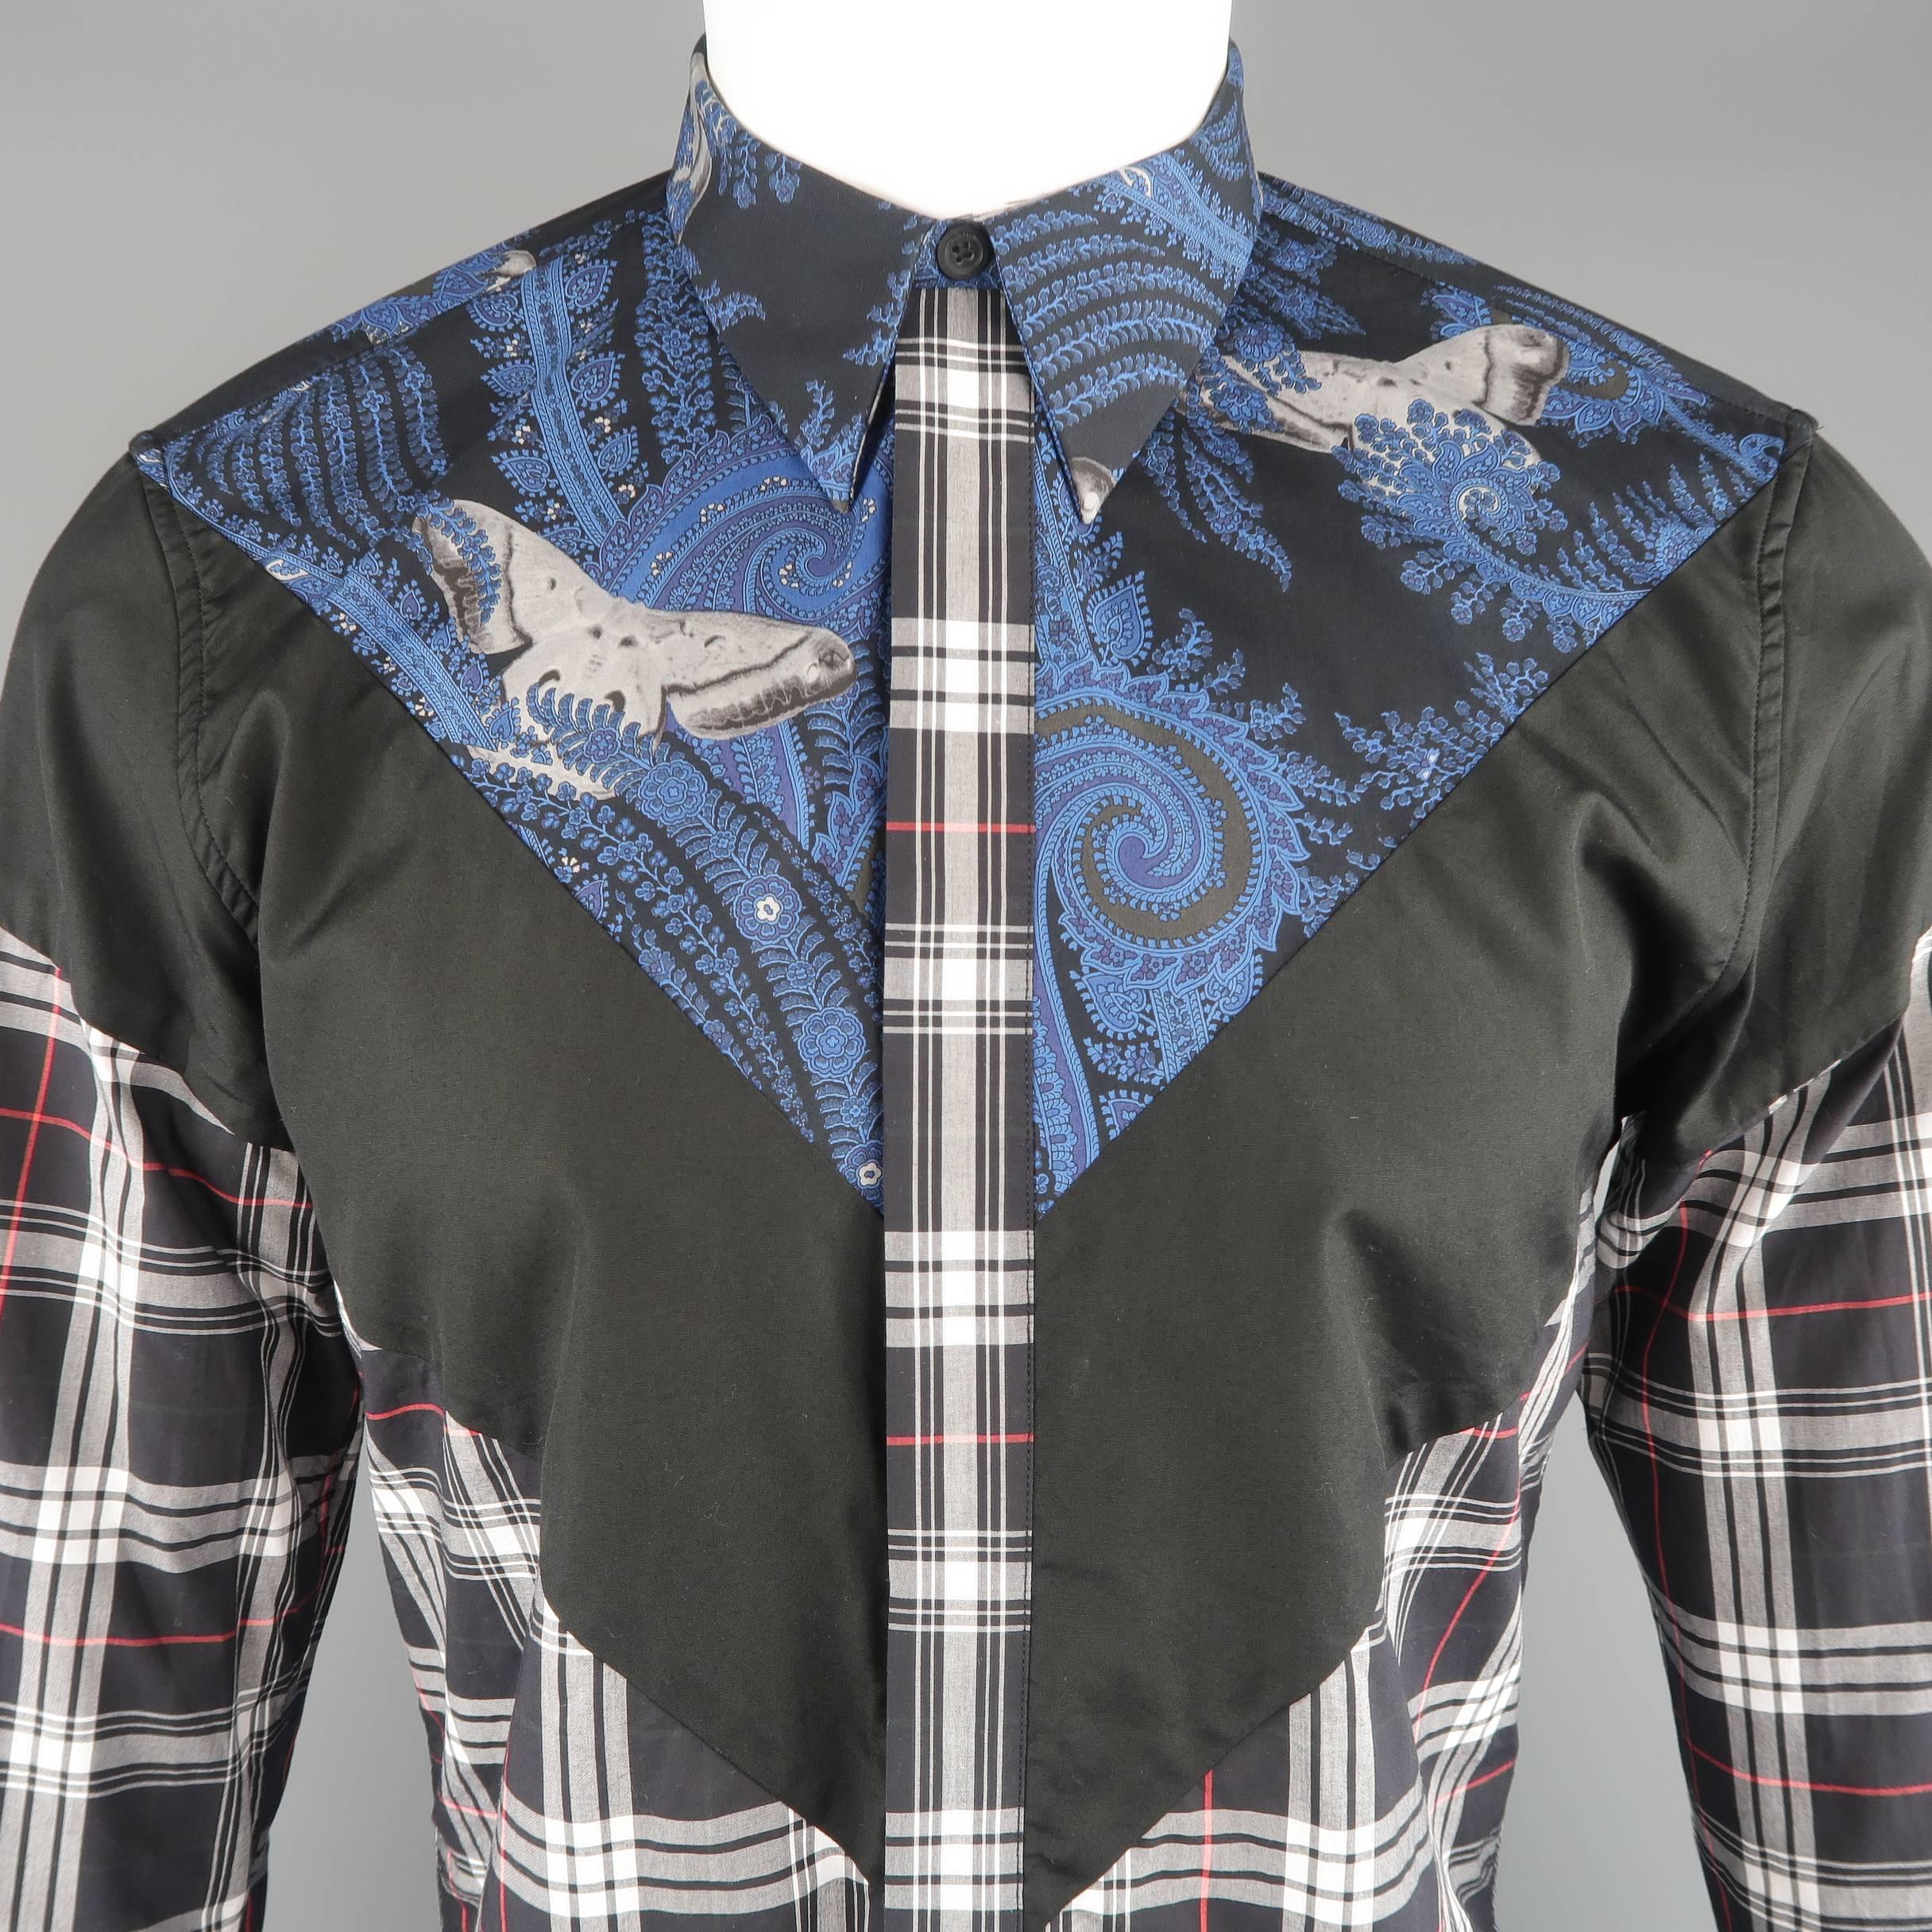 GIVENCHY Spring 2015 shirt by RICCARDO TISCI comes in black, white, and red plaid cotton with a pointed collar, hidden placket closure, blue butterfly paisley print top panel, and black V mid panel. Made in Portugal.
 
Excellent Pre-Owned